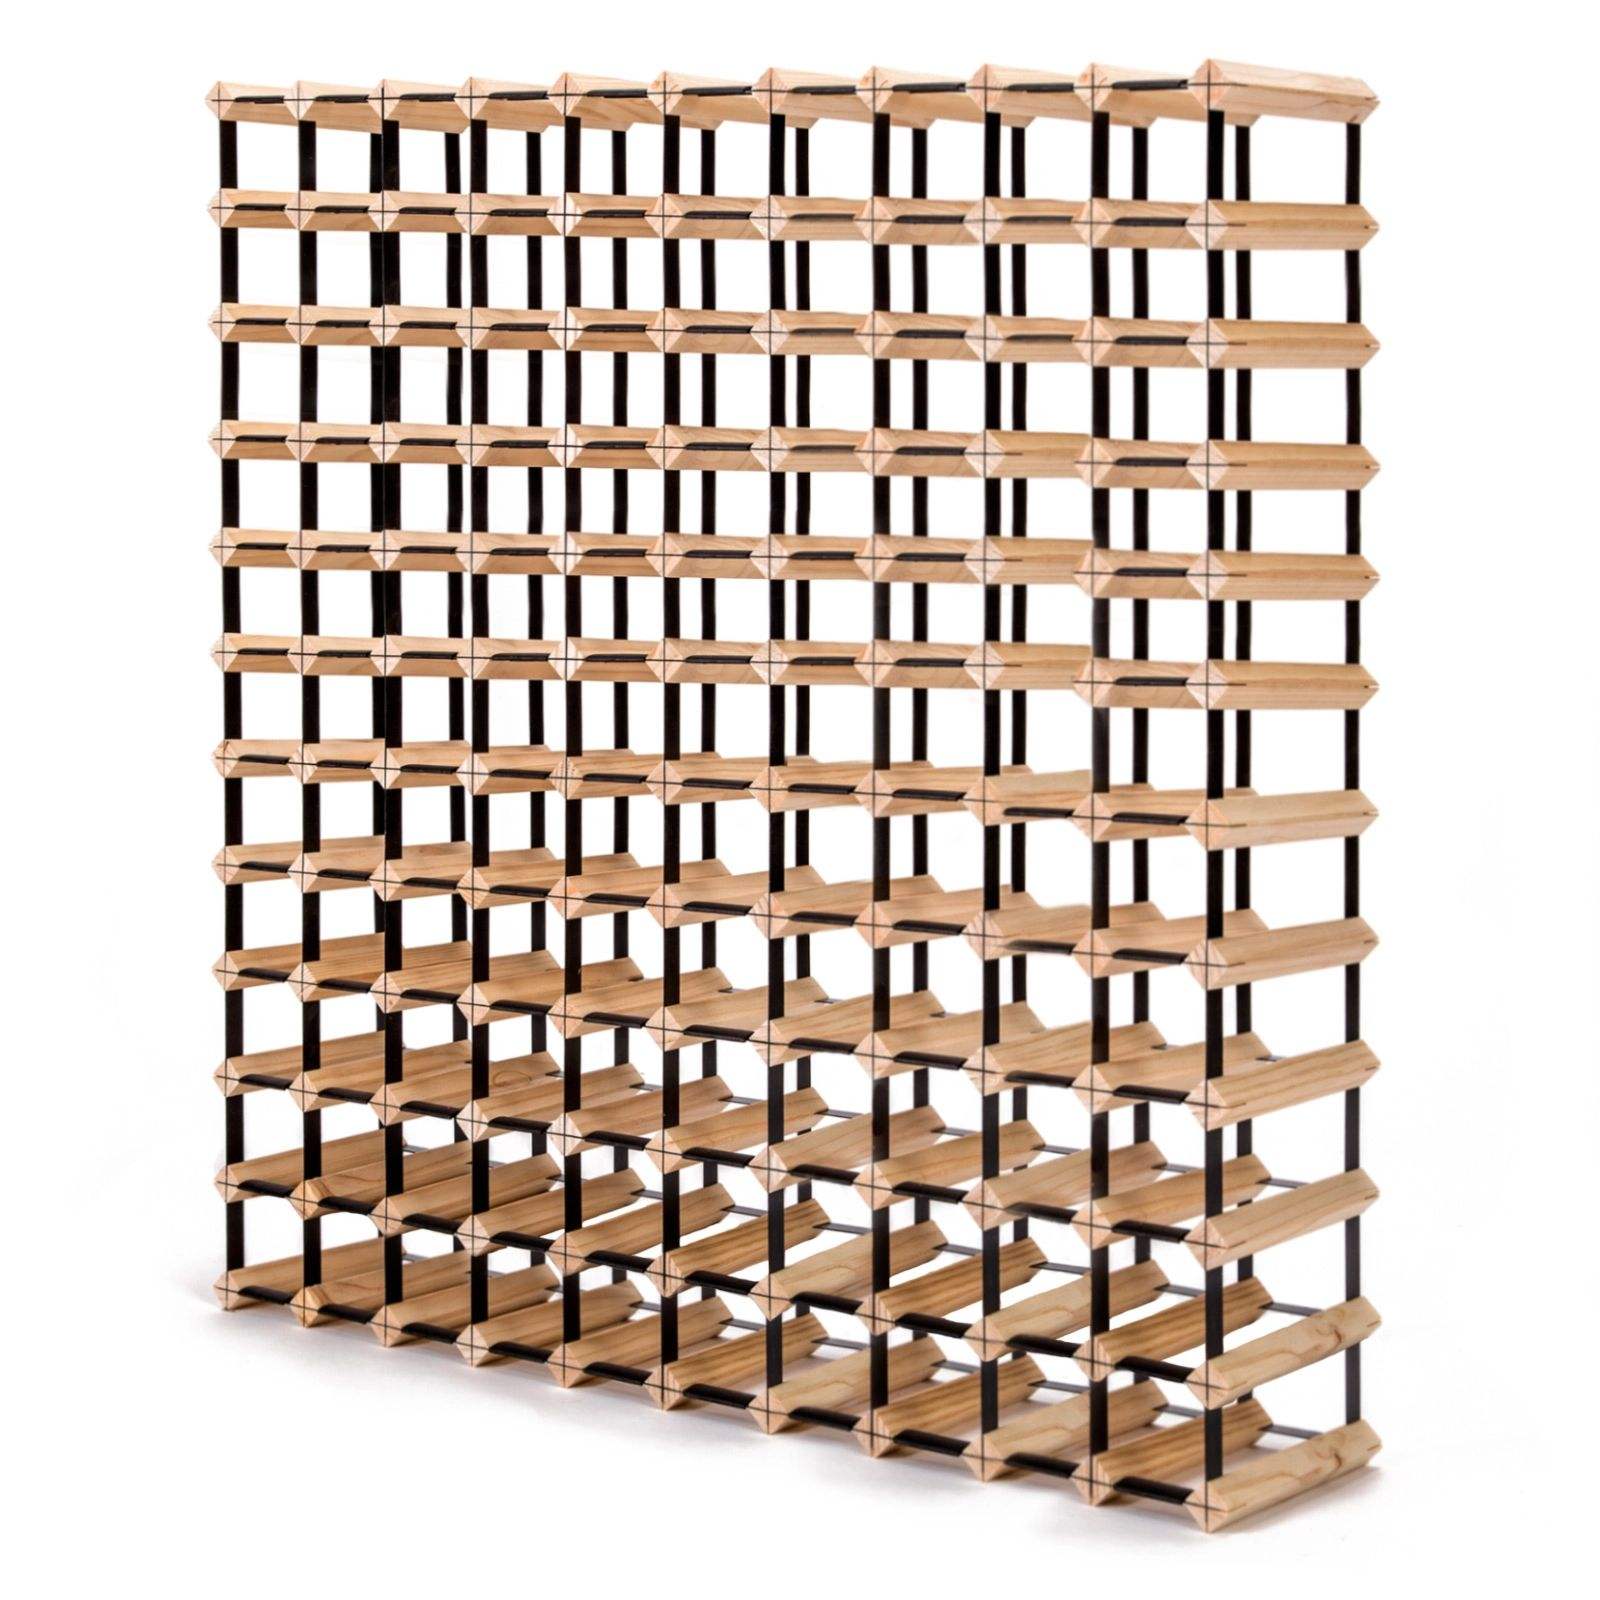 Minghou Presents 120 Bottle Classic Natural Wooden Wine Rack: Modern Elegance for Your Wine Collection